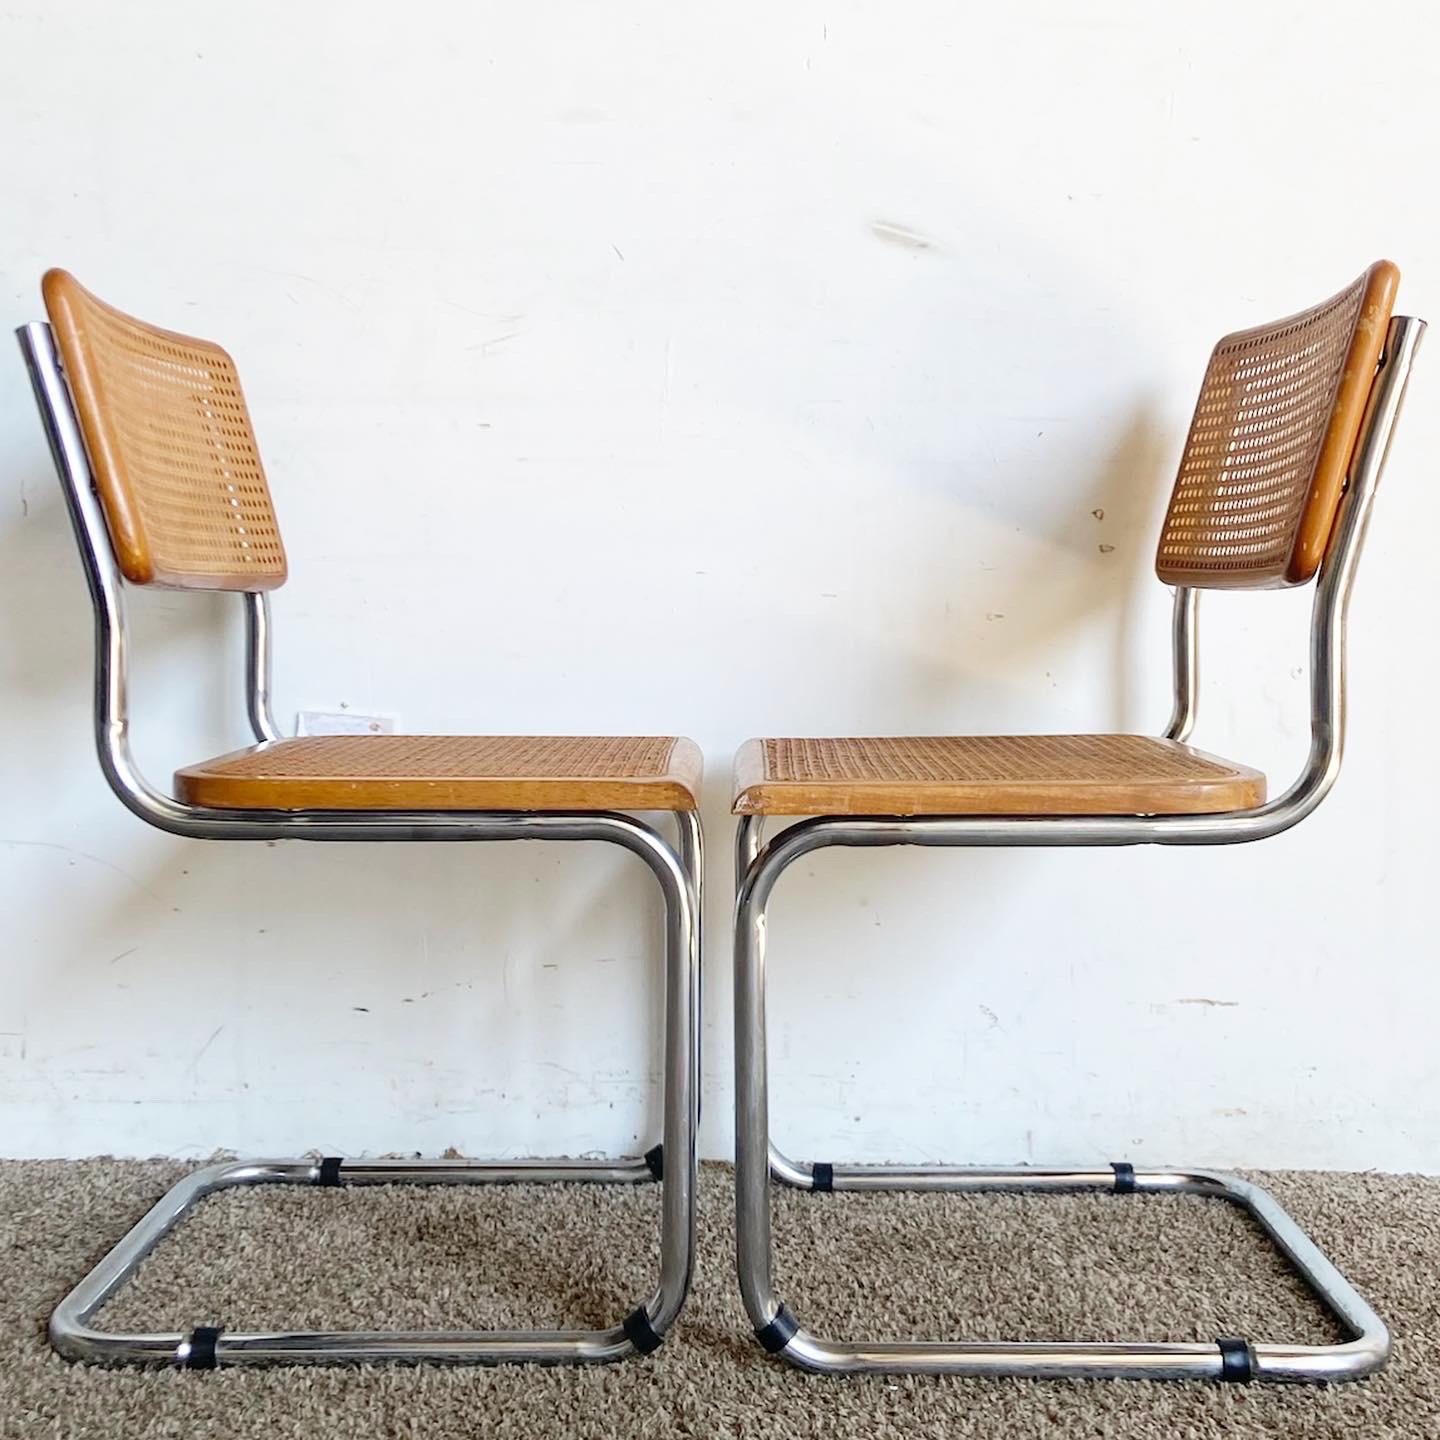 Taiwanese Mid Century Modern Cane and Chrome Cantilever Dining Chairs - a Pair For Sale